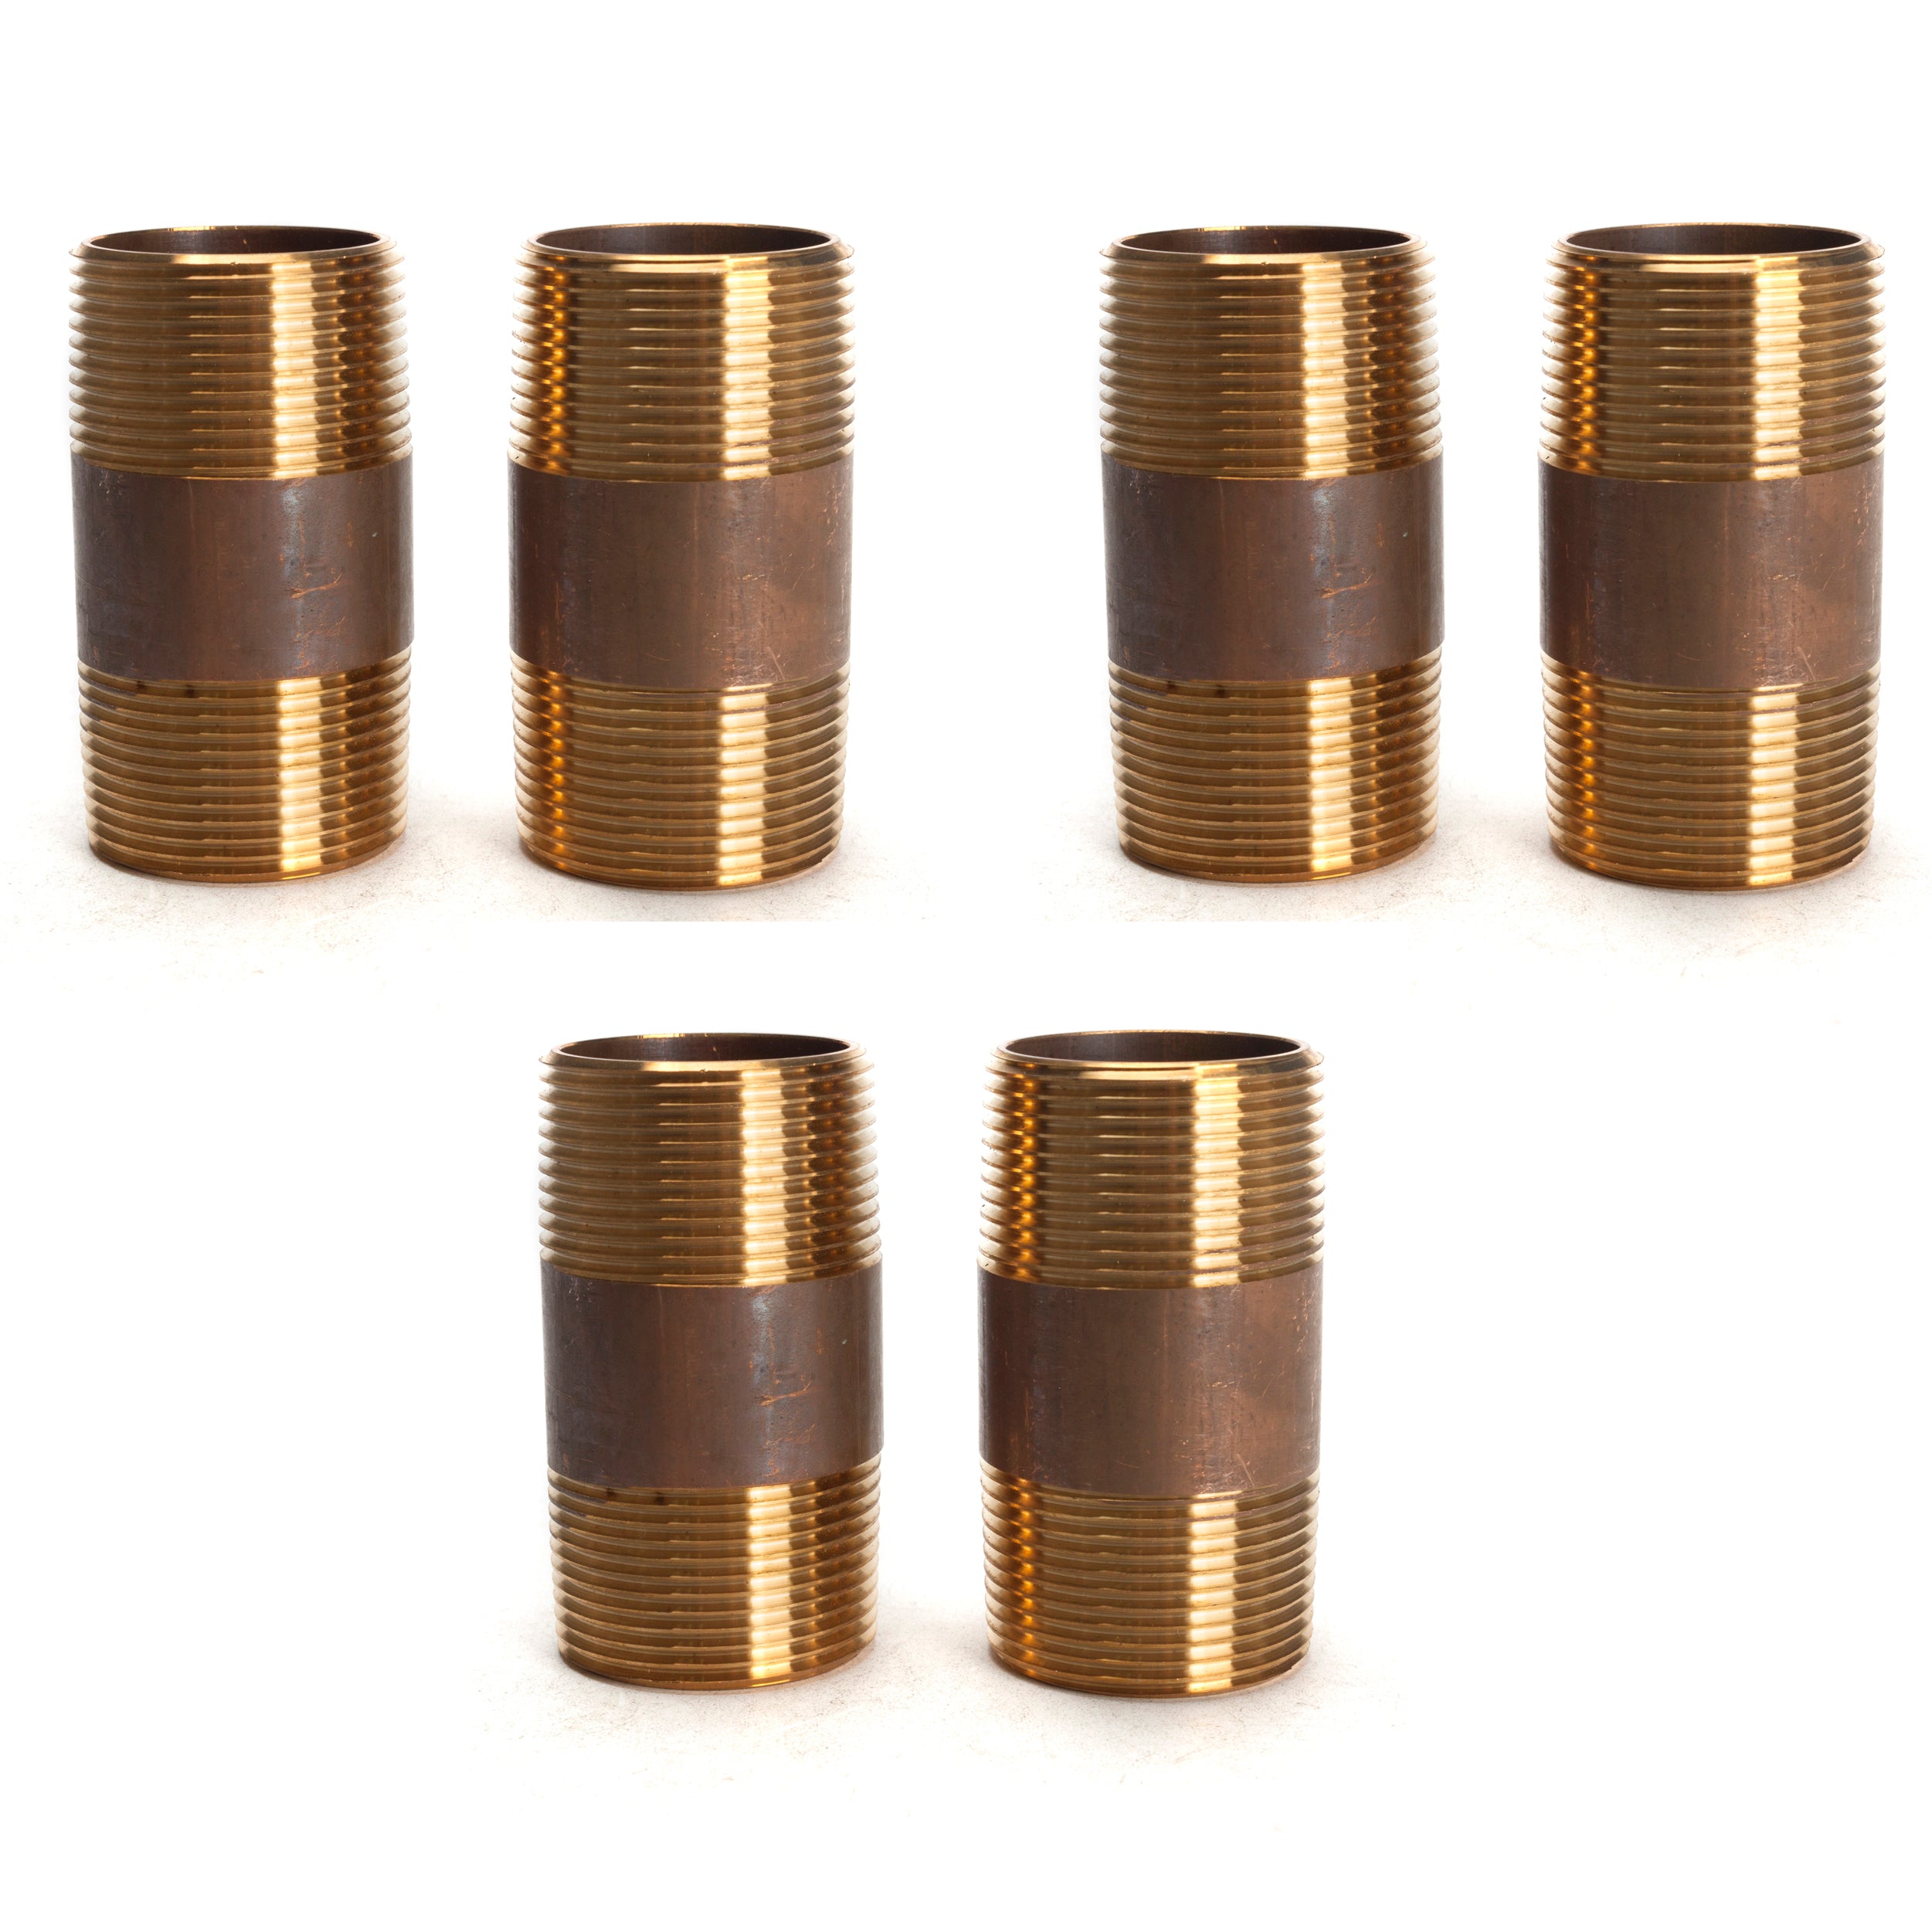 LTWFITTING Brass Pipe 3 Inch Long Nipple Fitting 1-1/4 Inch Male NPT Air Water(Pack of 6)